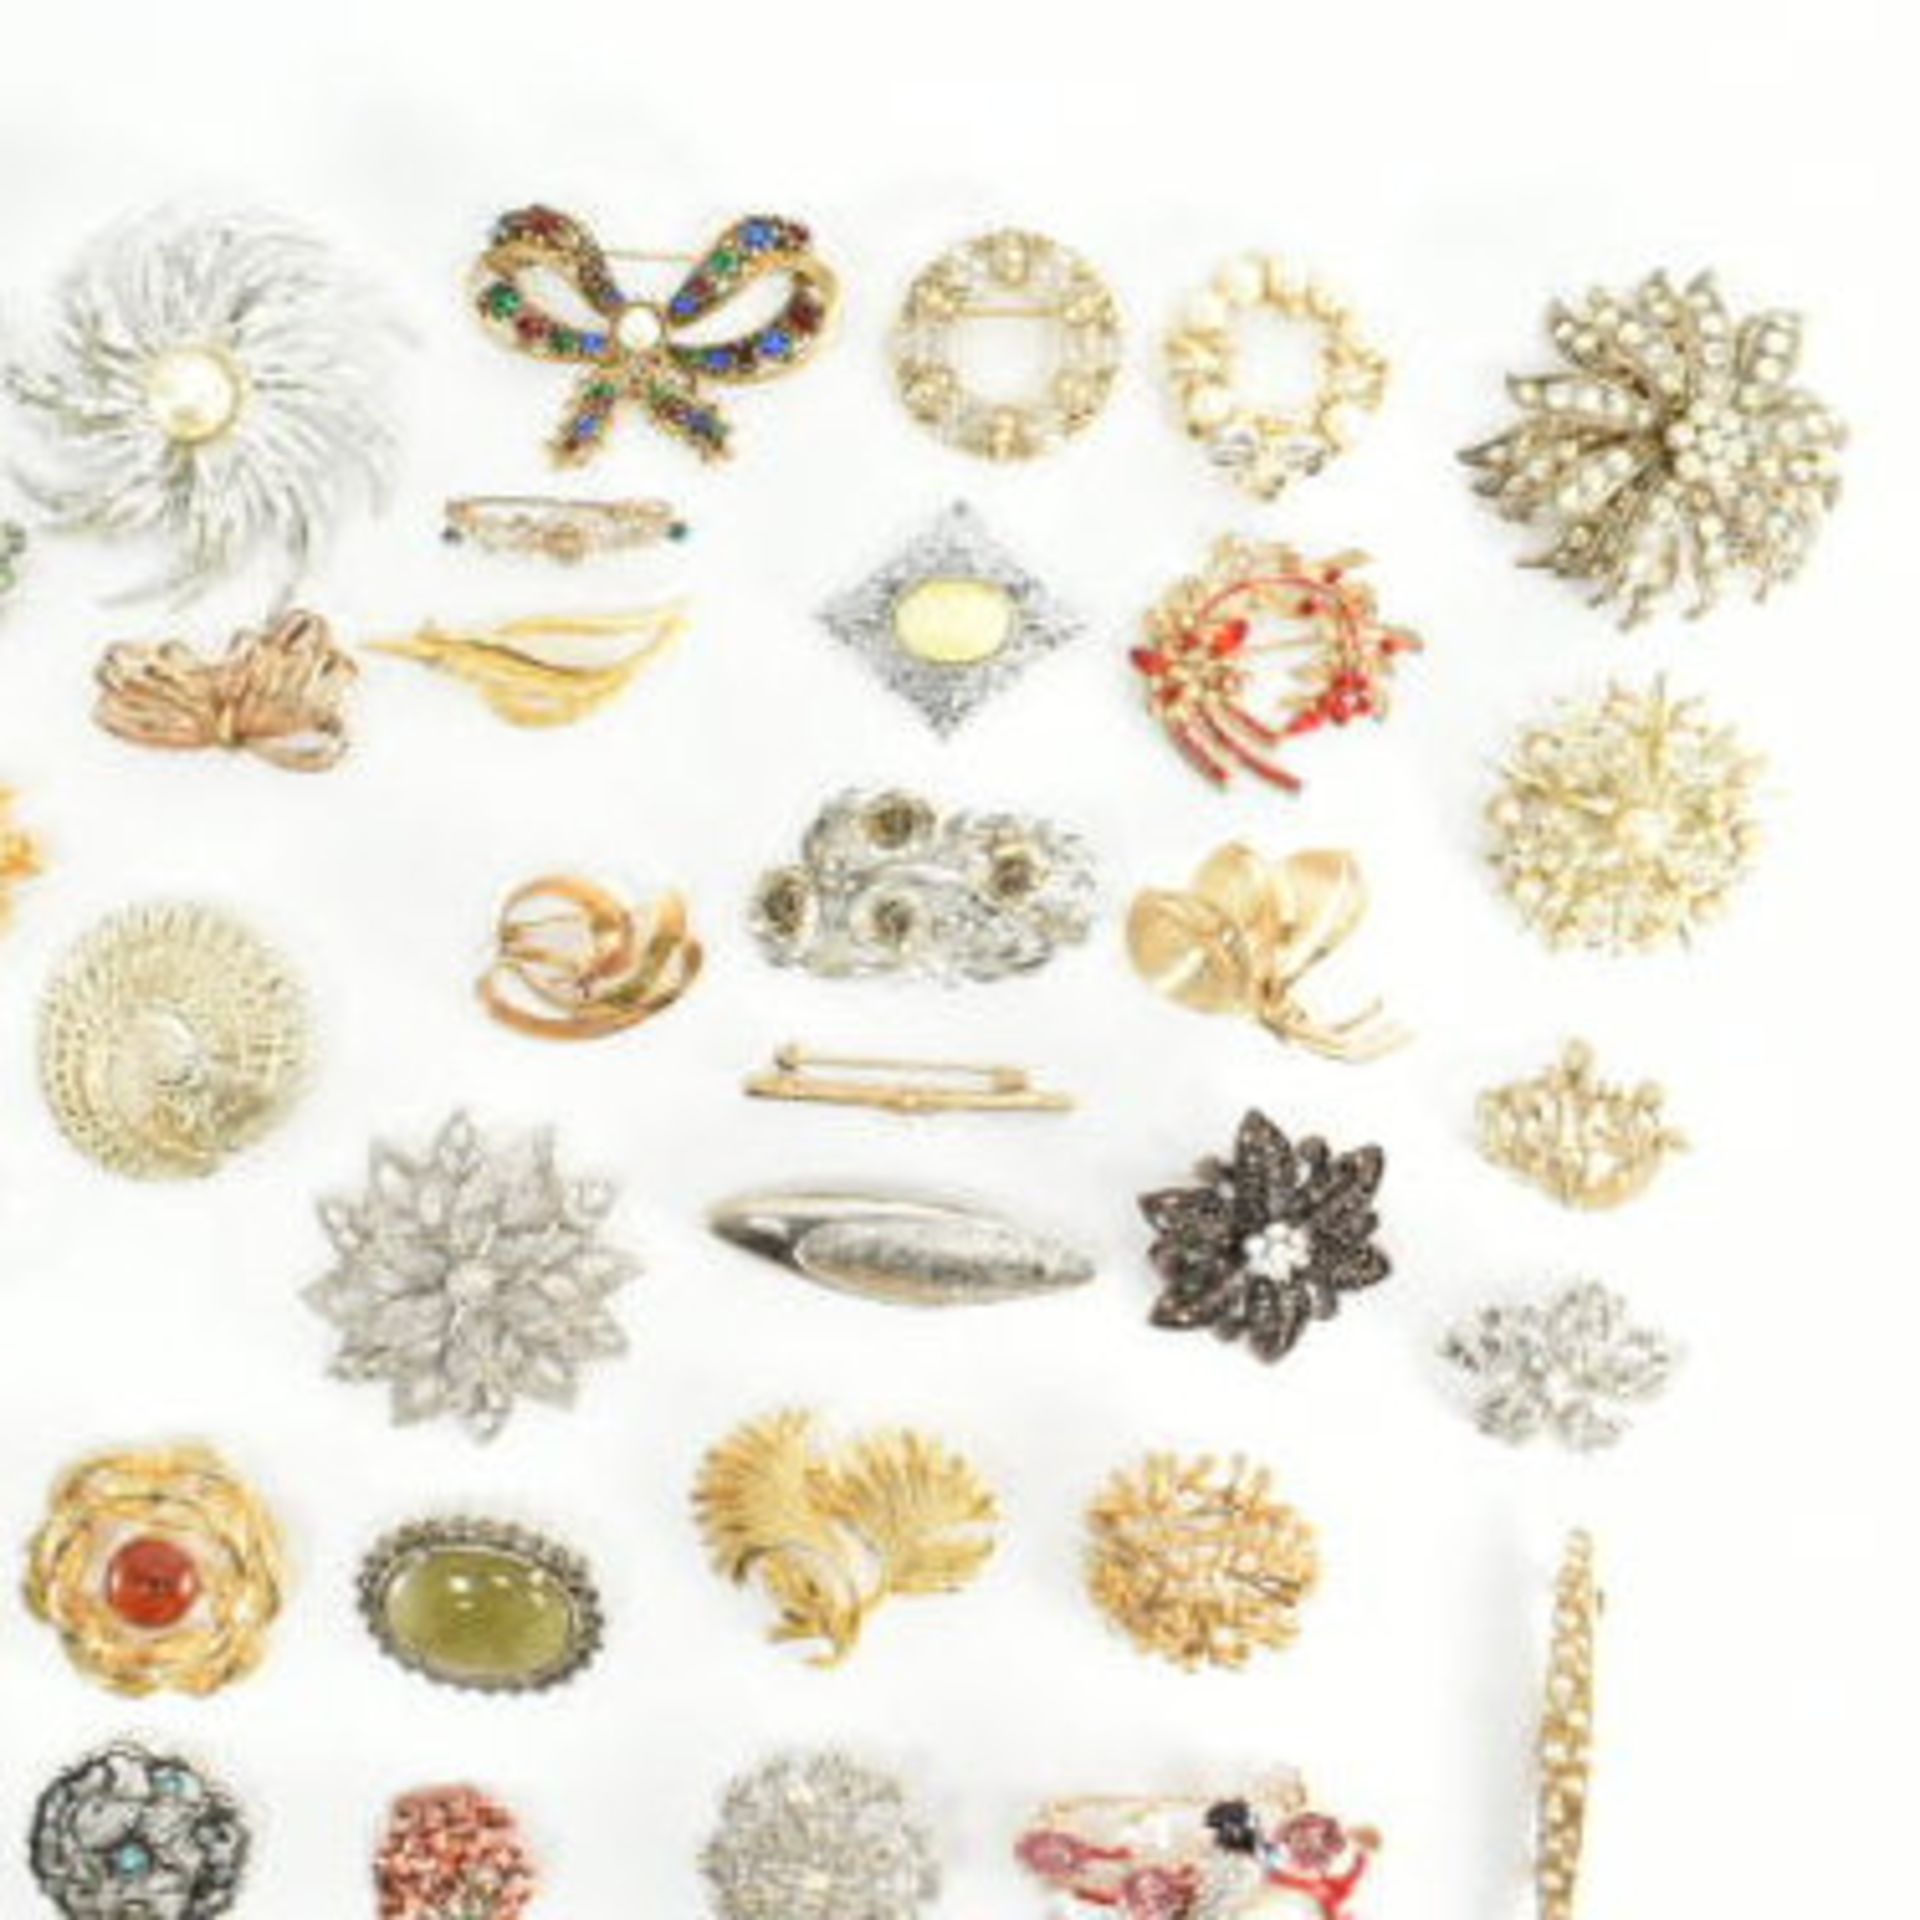 COLLECTION OF ASSORTED COSTUME JEWELLERY BROOCH PINS - Image 8 of 8